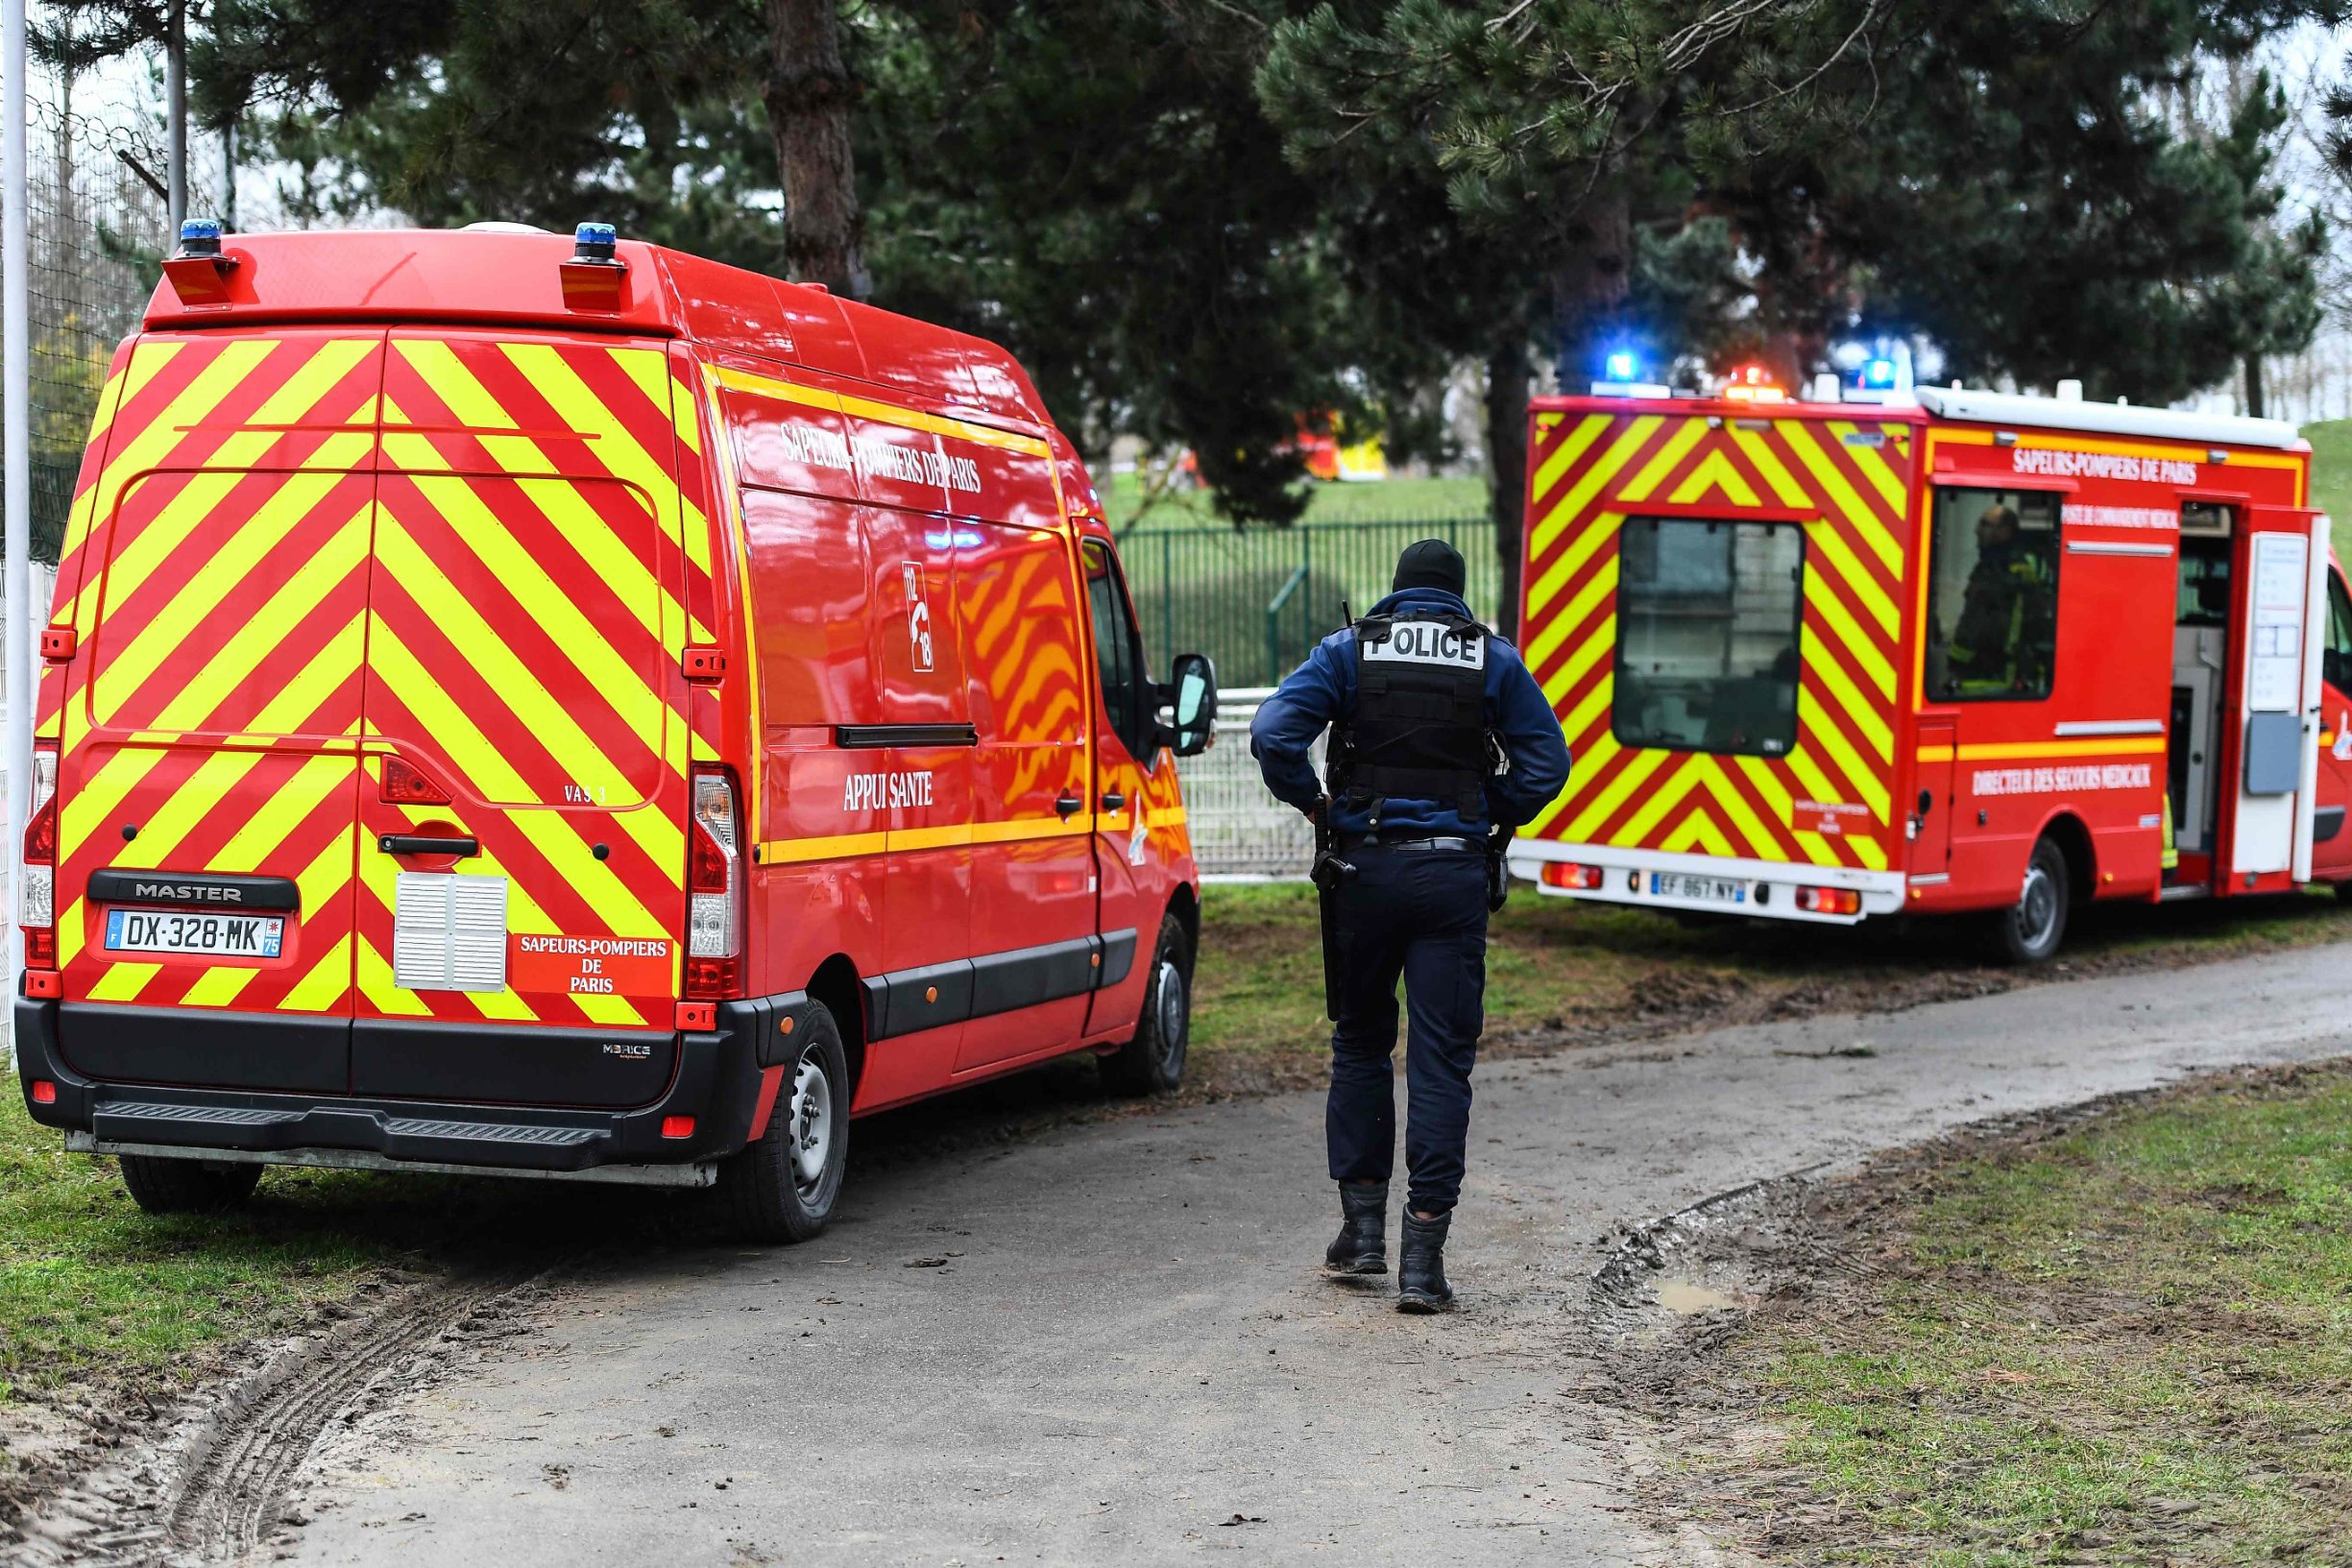 A policeman walks by firefighters vehicles in a park in the south of Paris' suburban city of Villejuif on January 3, 2020 where a man was shot and killed by officers after stabbing passers-by. - The man had attacked 